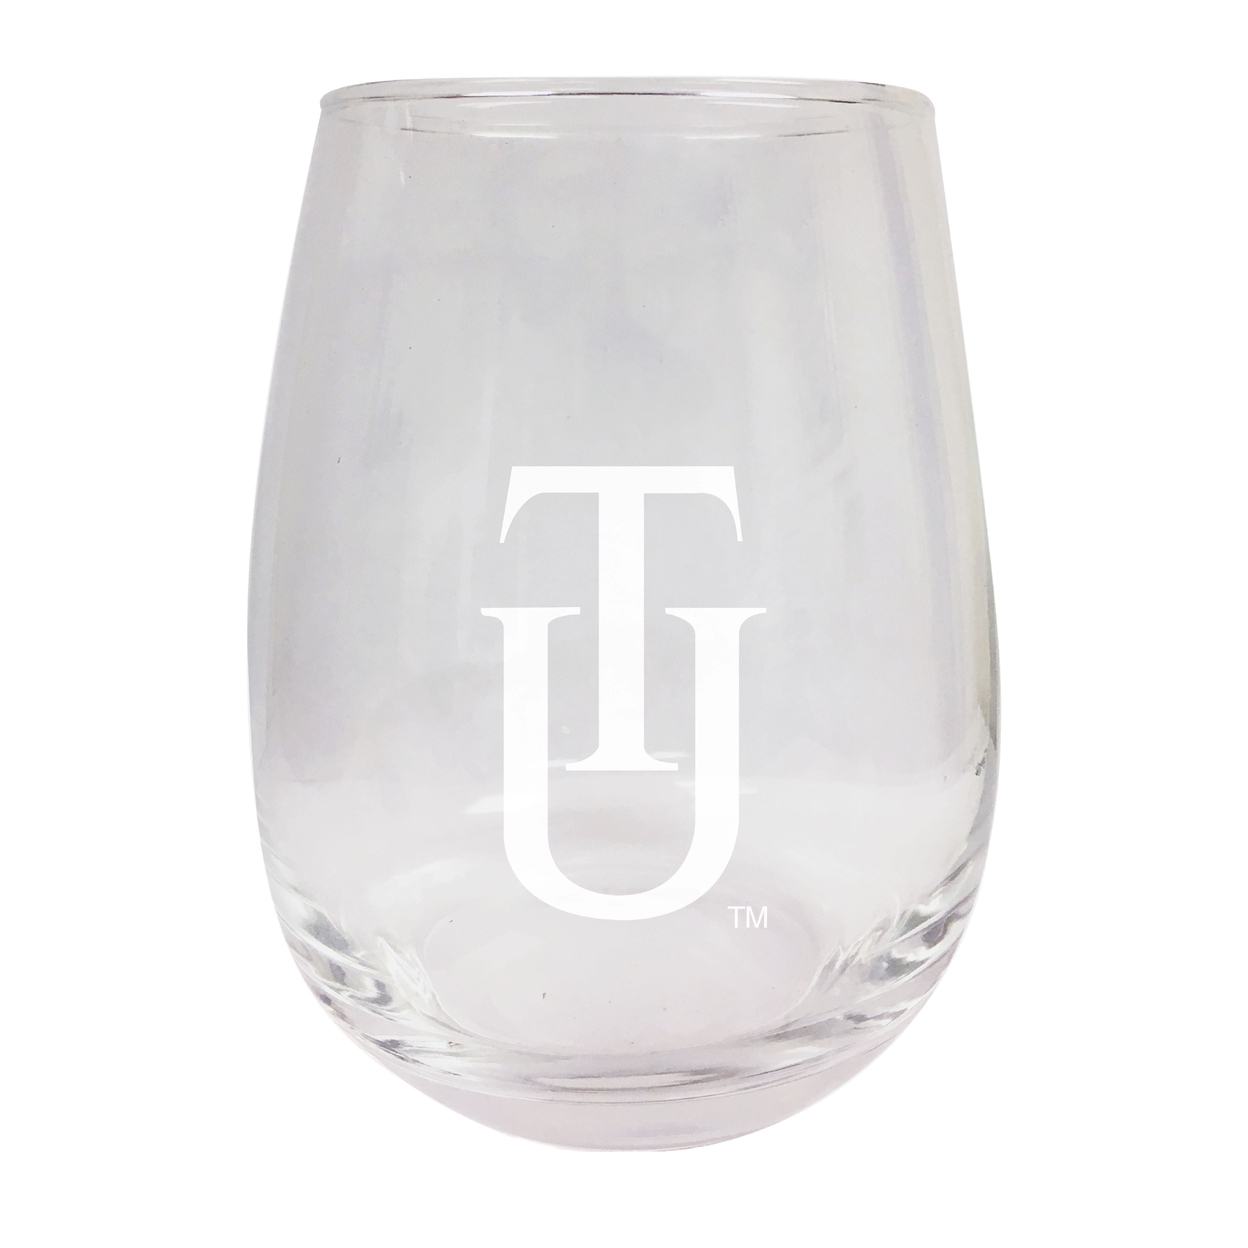 Tuskegee University Etched Stemless Wine Glass